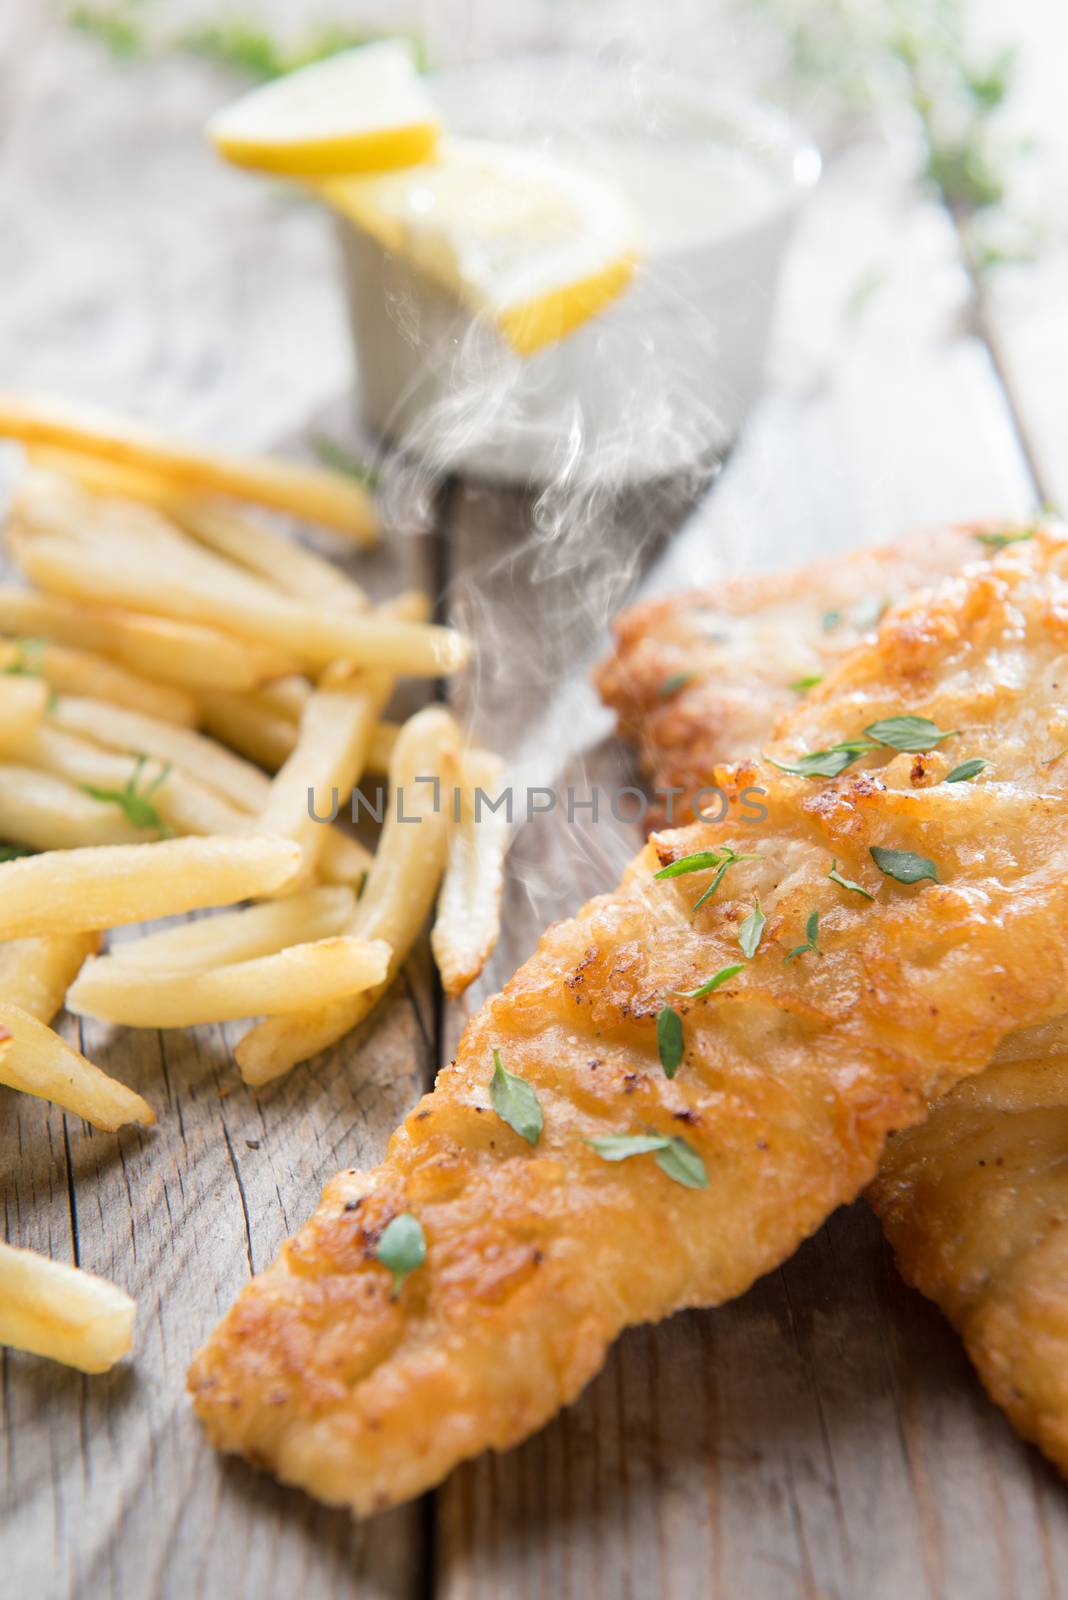 Fish and chips with hot steams by szefei